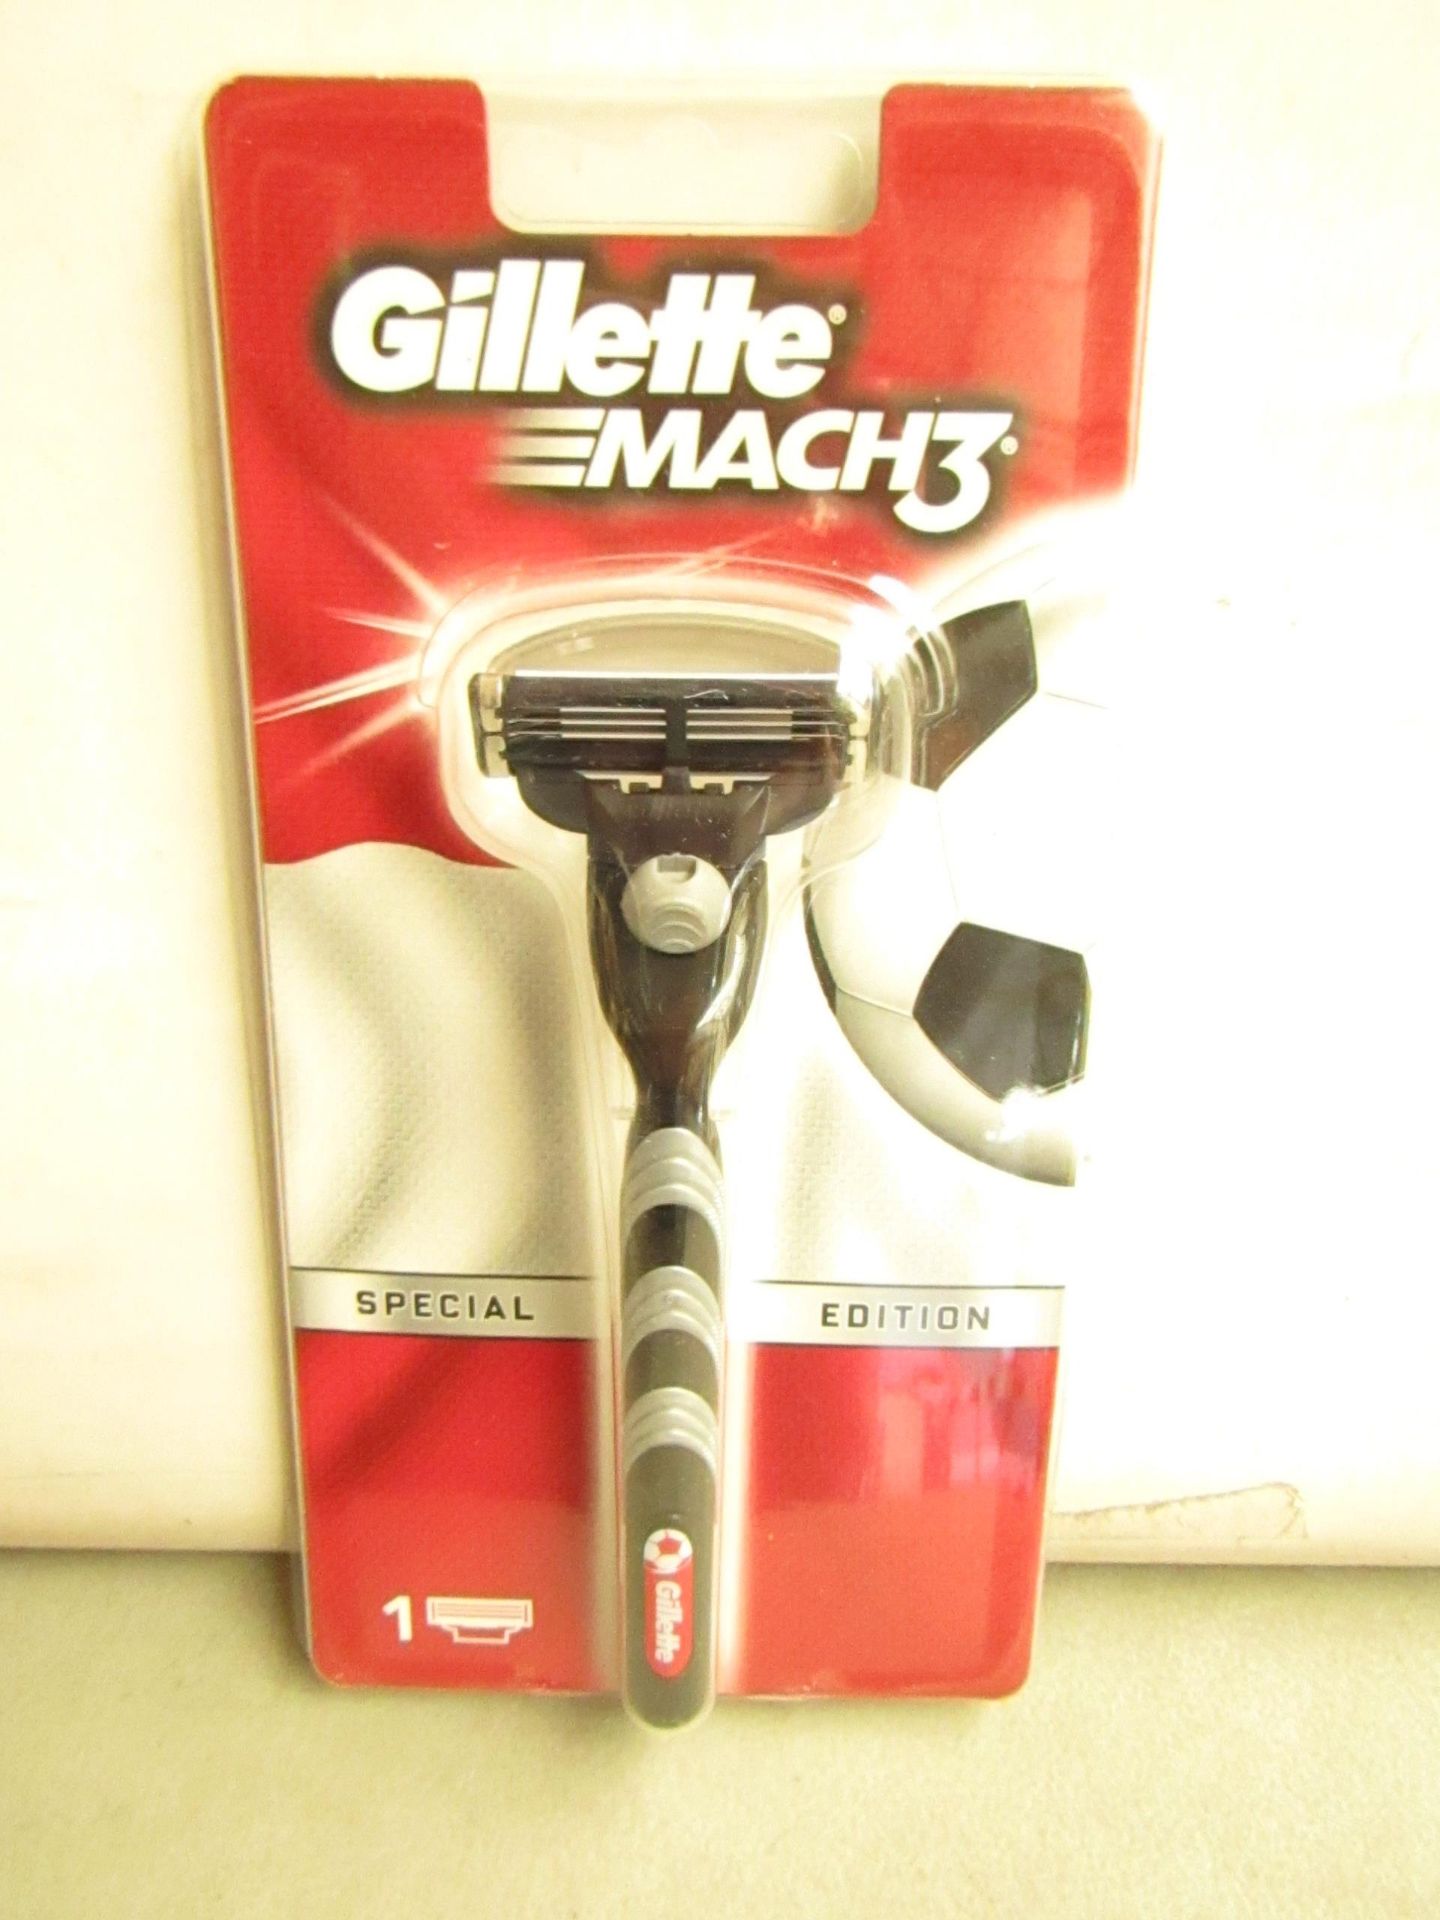 Gillette Mach 3 Special Edition Razor. New & Blister Packed